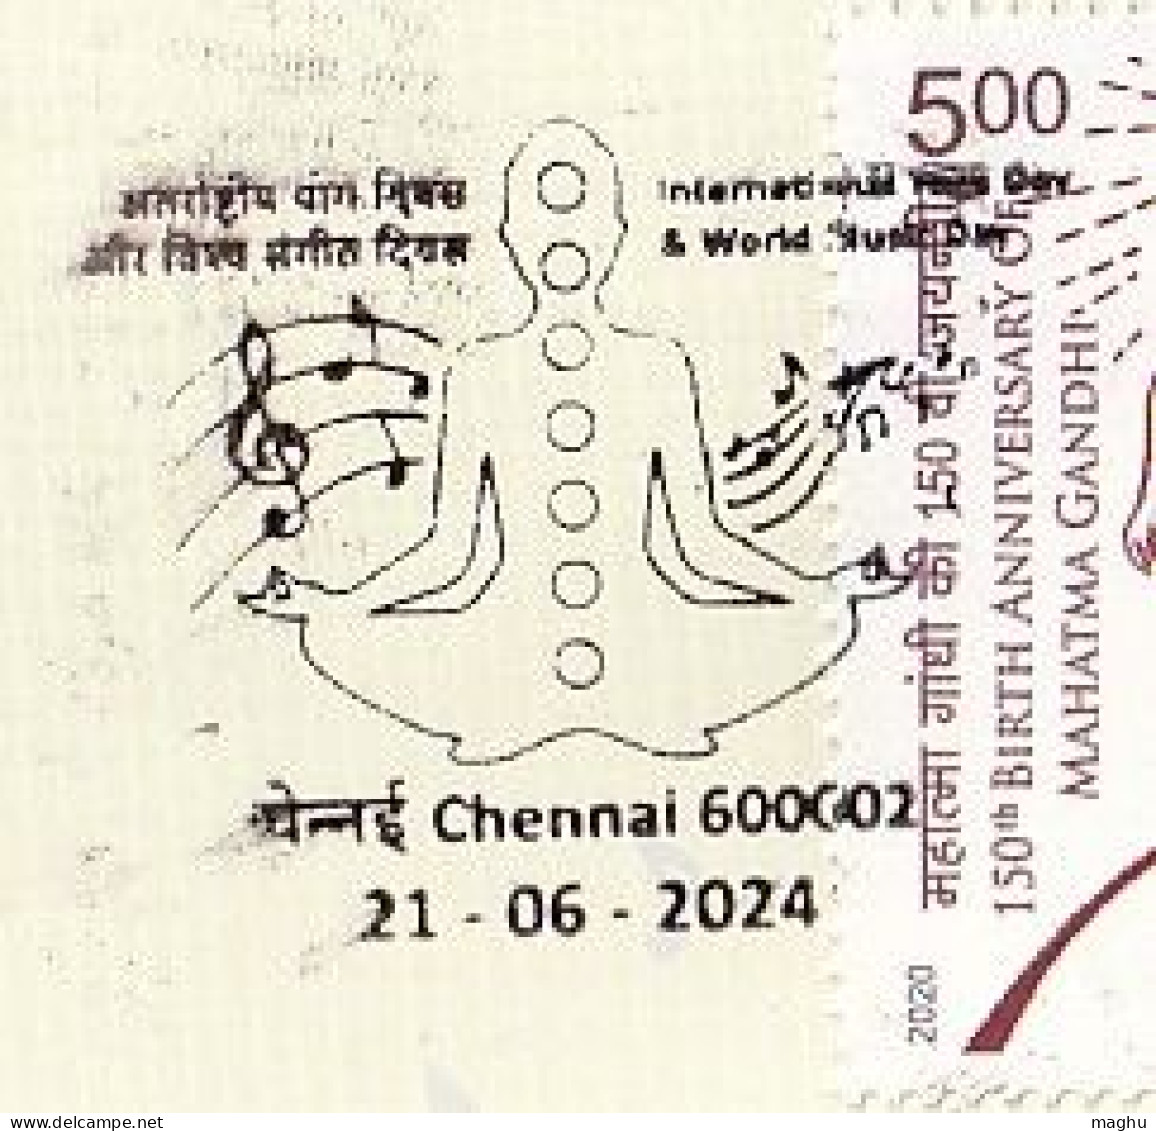 'Yoga With Music' Special Cover 2024, Inter., Yoga Day & World Music Day, For Body, Mind & Breath Health & Life, - Storia Postale